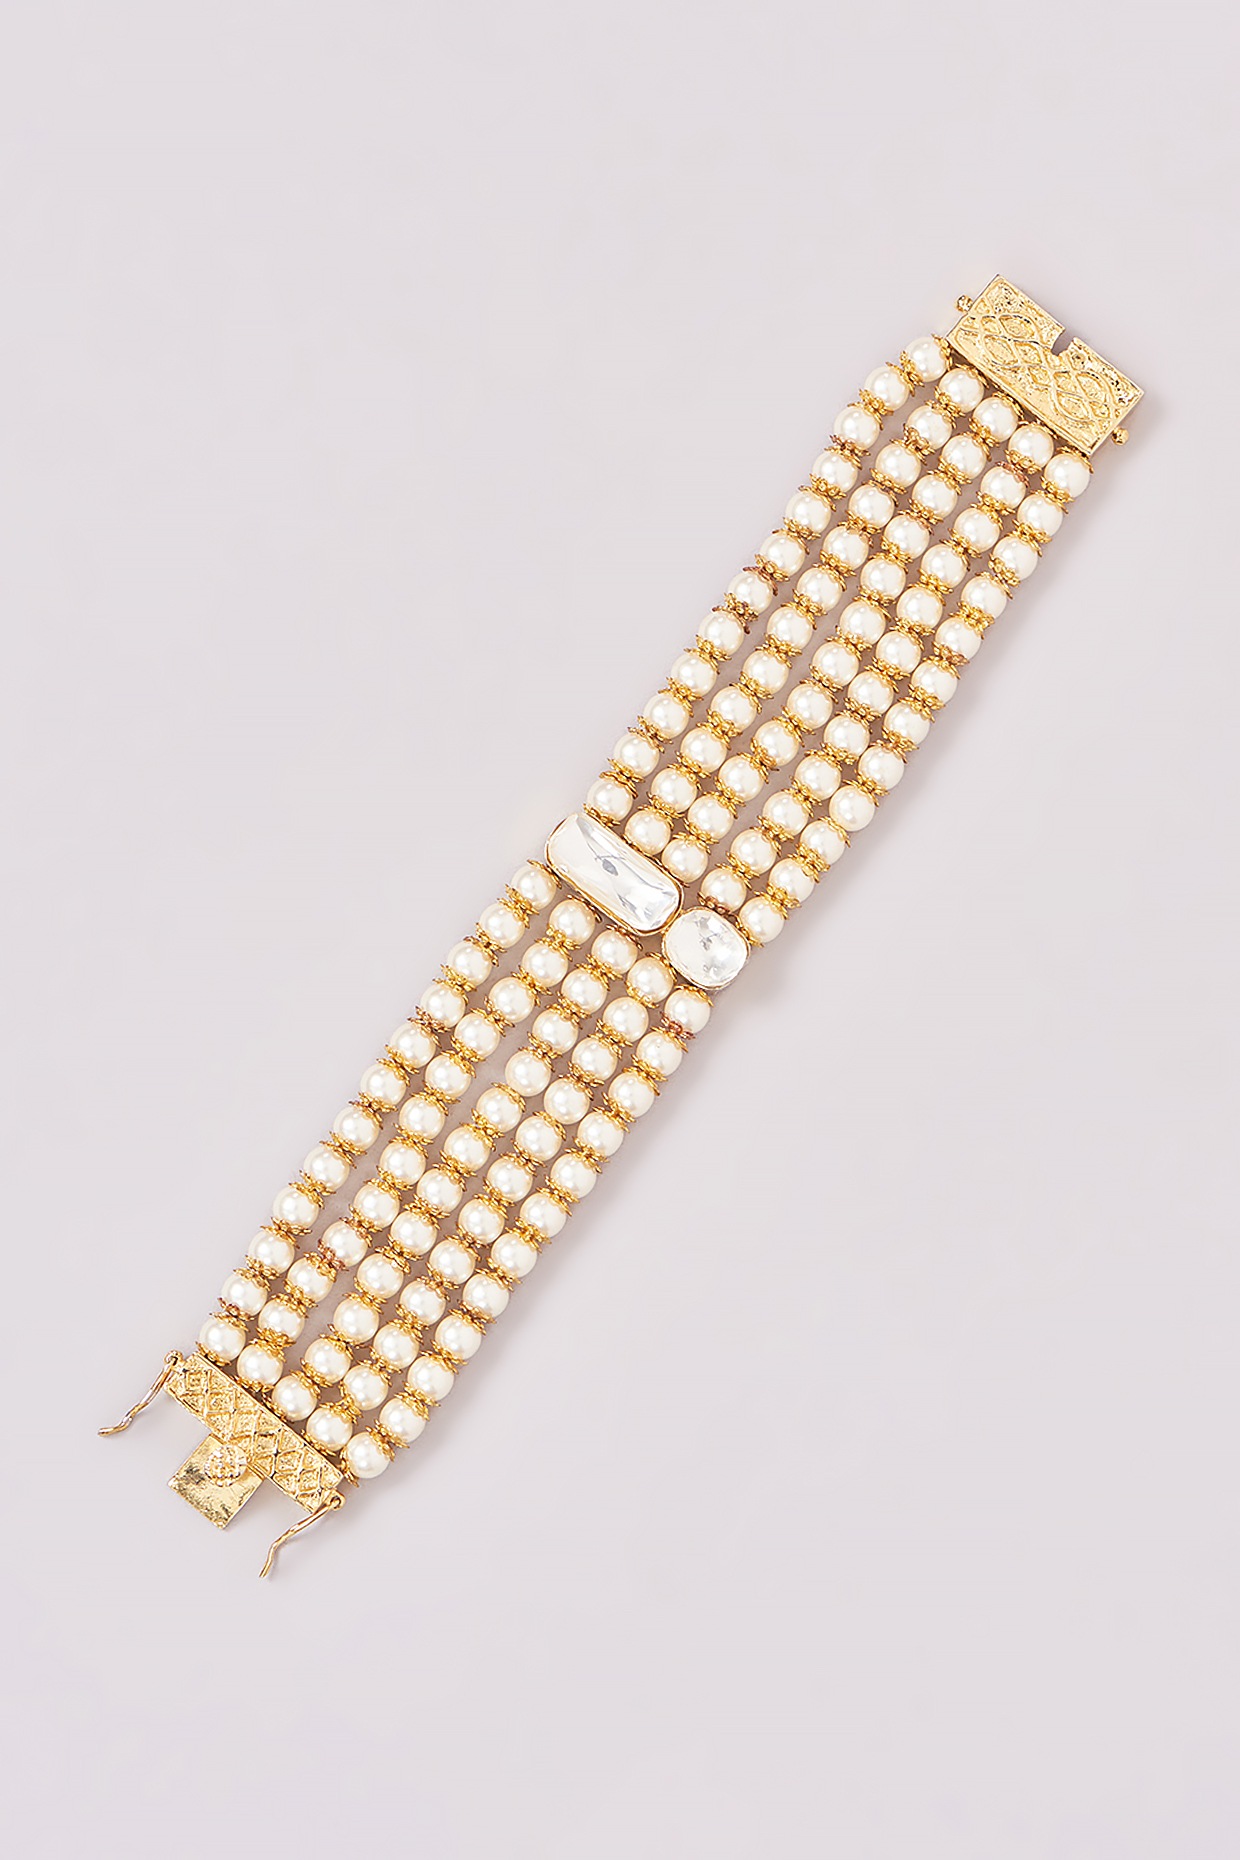 Anjali Tulasi Tulsi Bracelet With Moonstone and Pearls - Etsy